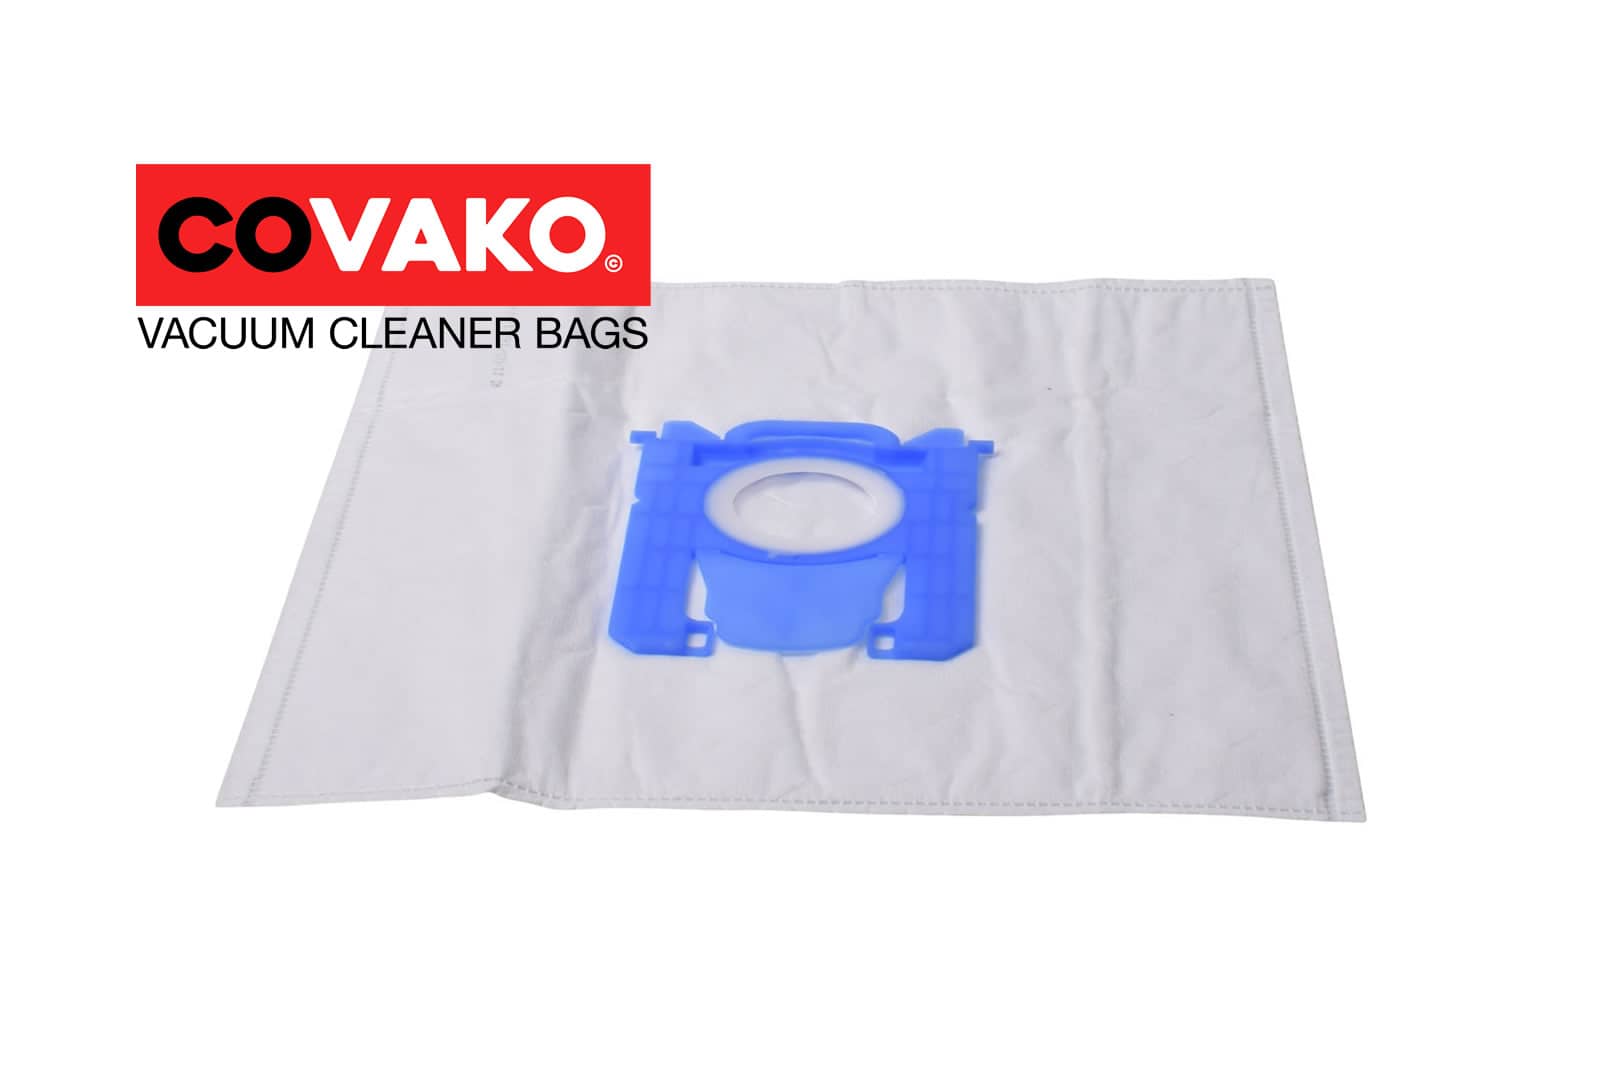 Electrolux AE 305 SC Ergo Space / Synthesis - Electrolux vacuum cleaner bags